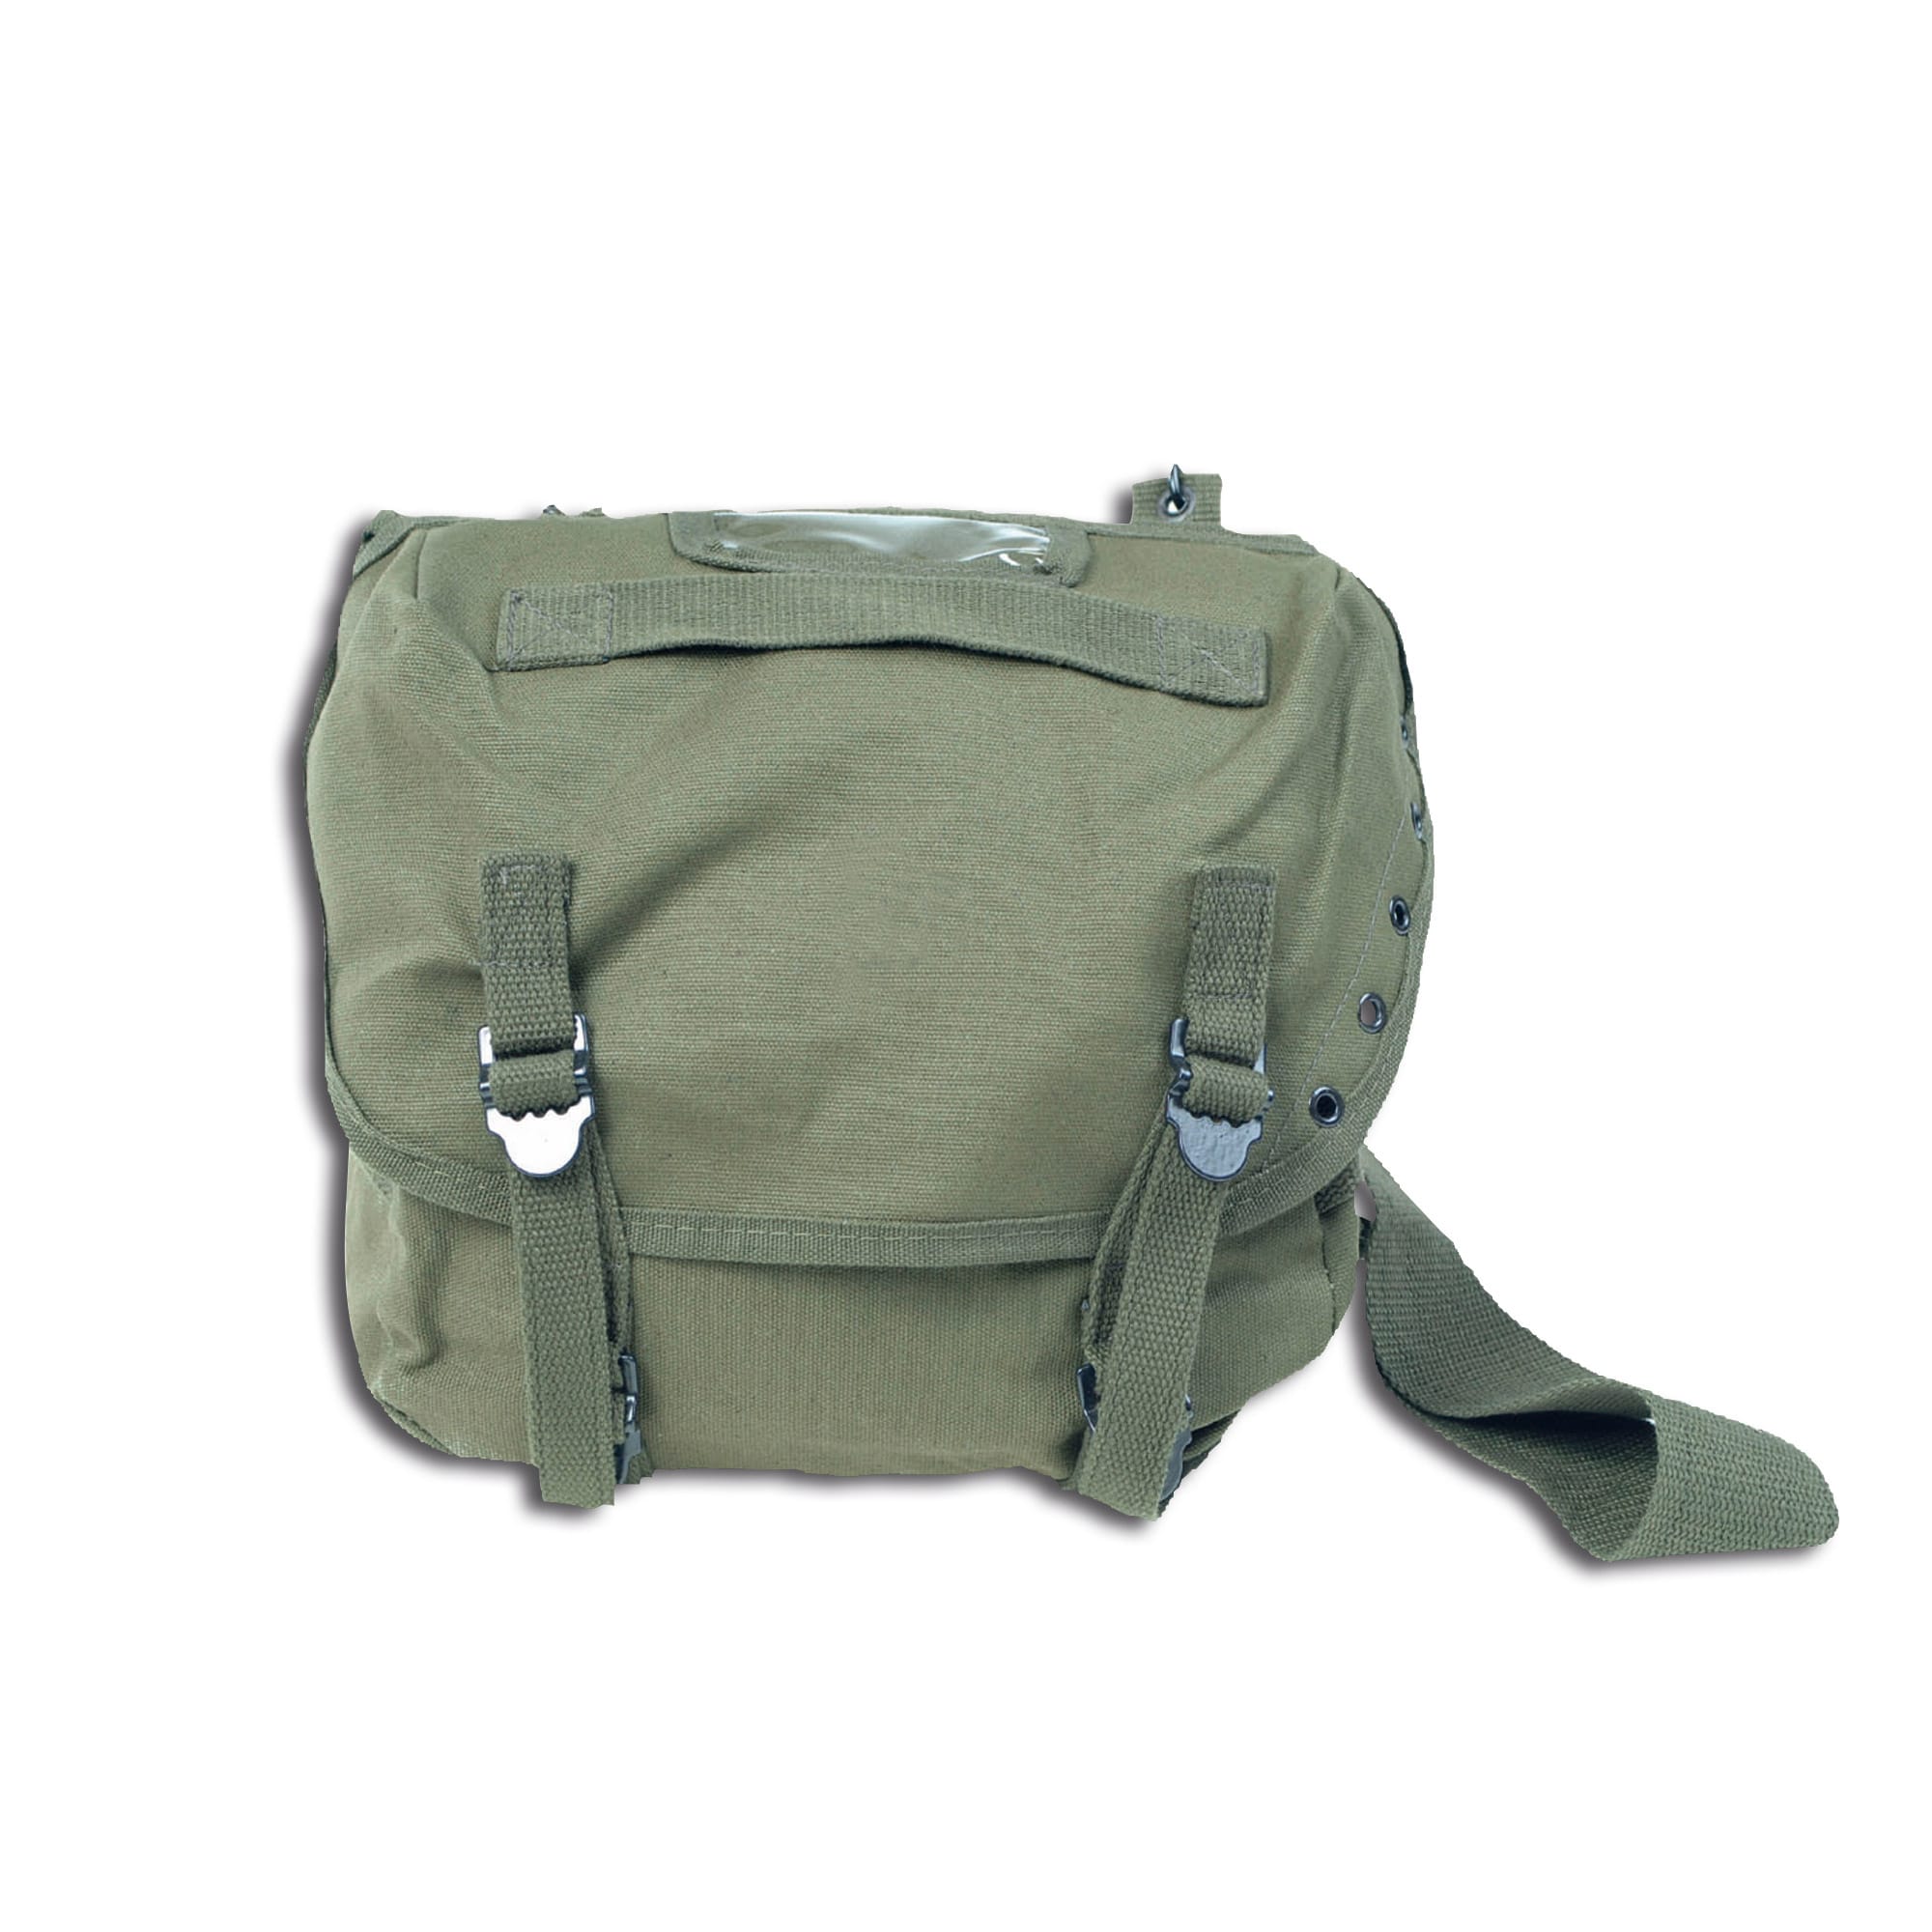 Purchase the Butt Pack olive green by ASMC